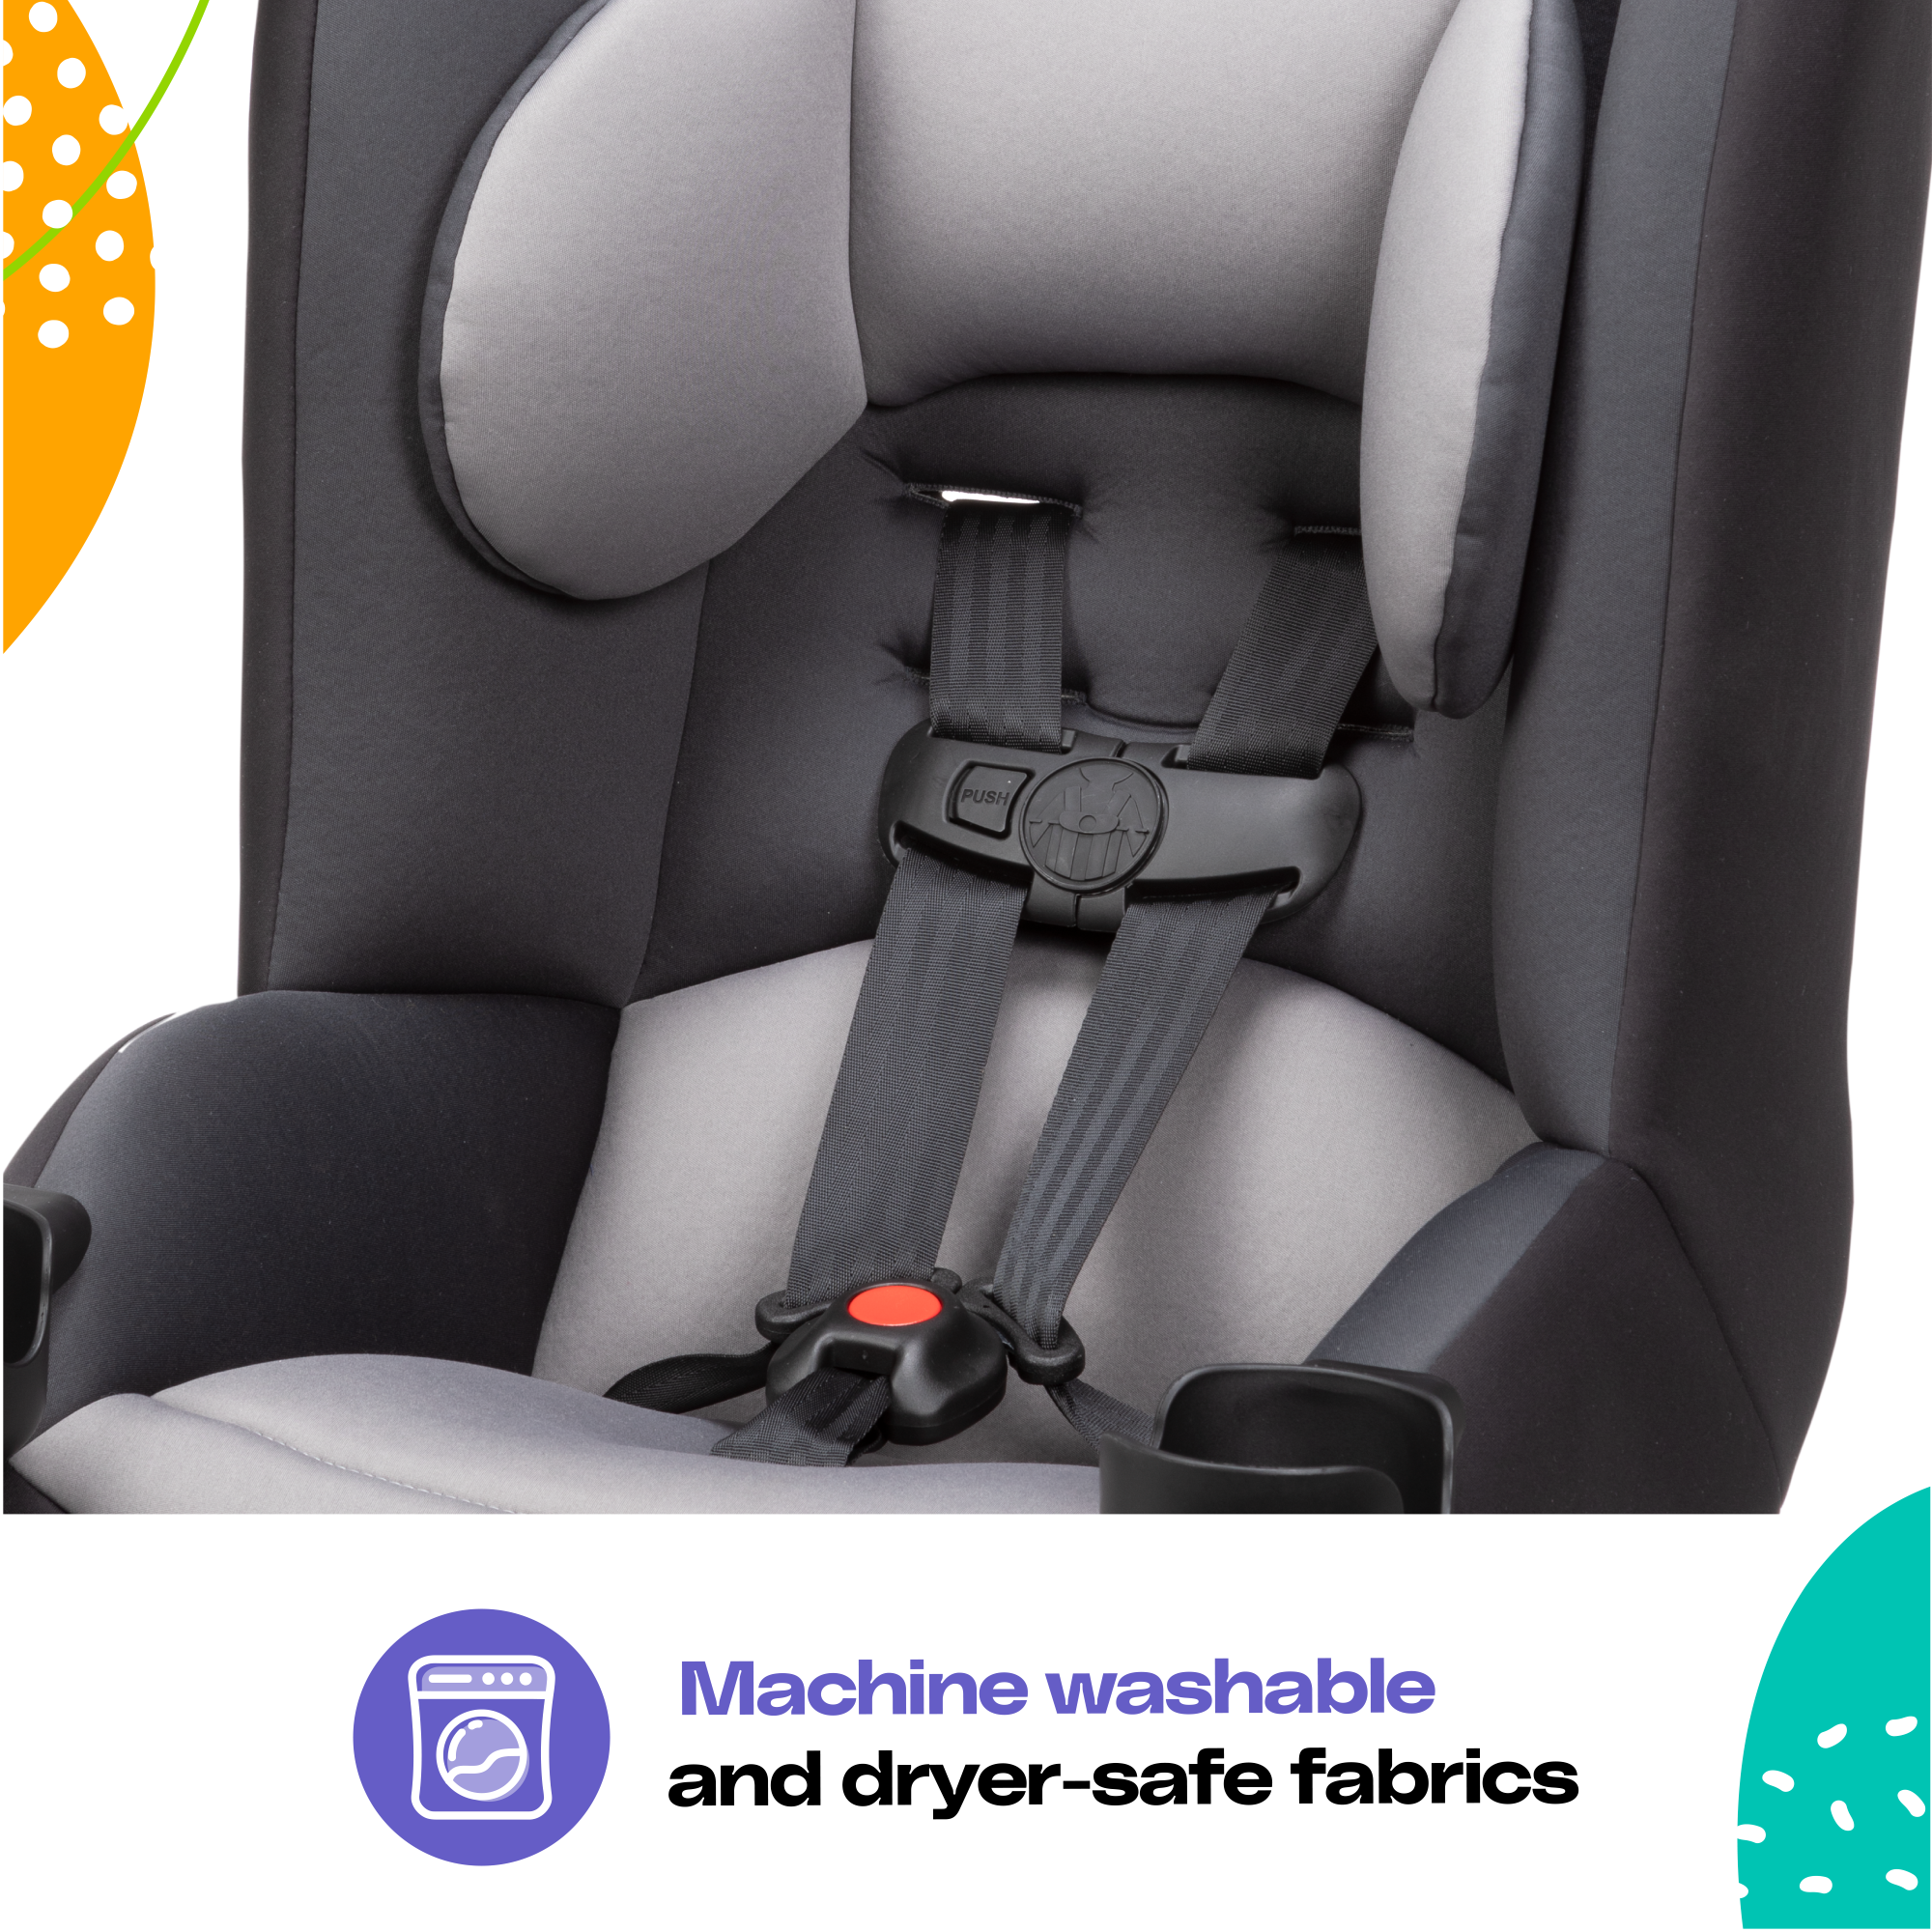 Cosco MightyFit LX Convertible Car Seat - machine washable and dryer-safe fabrics